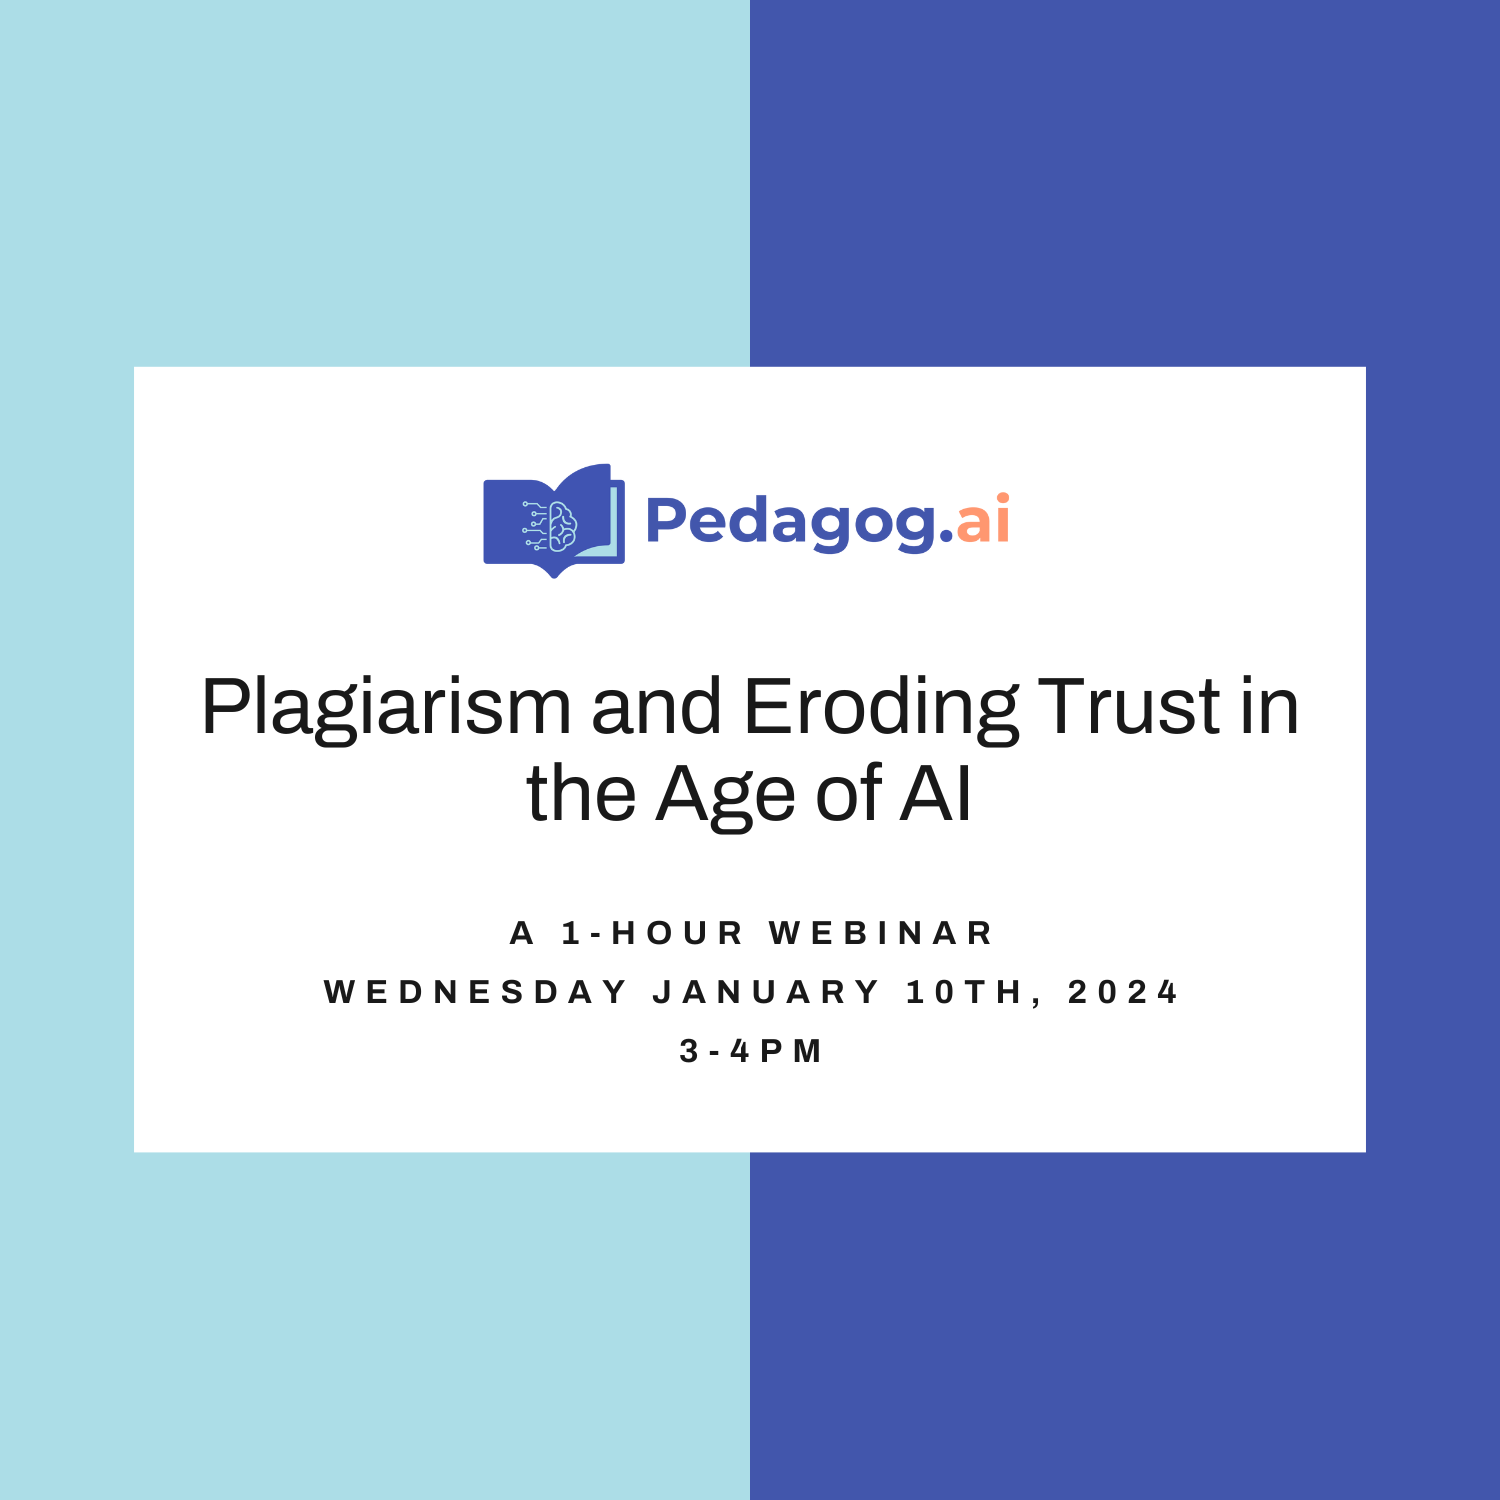 Plagiarism and Eroding Trust in the Age of AI